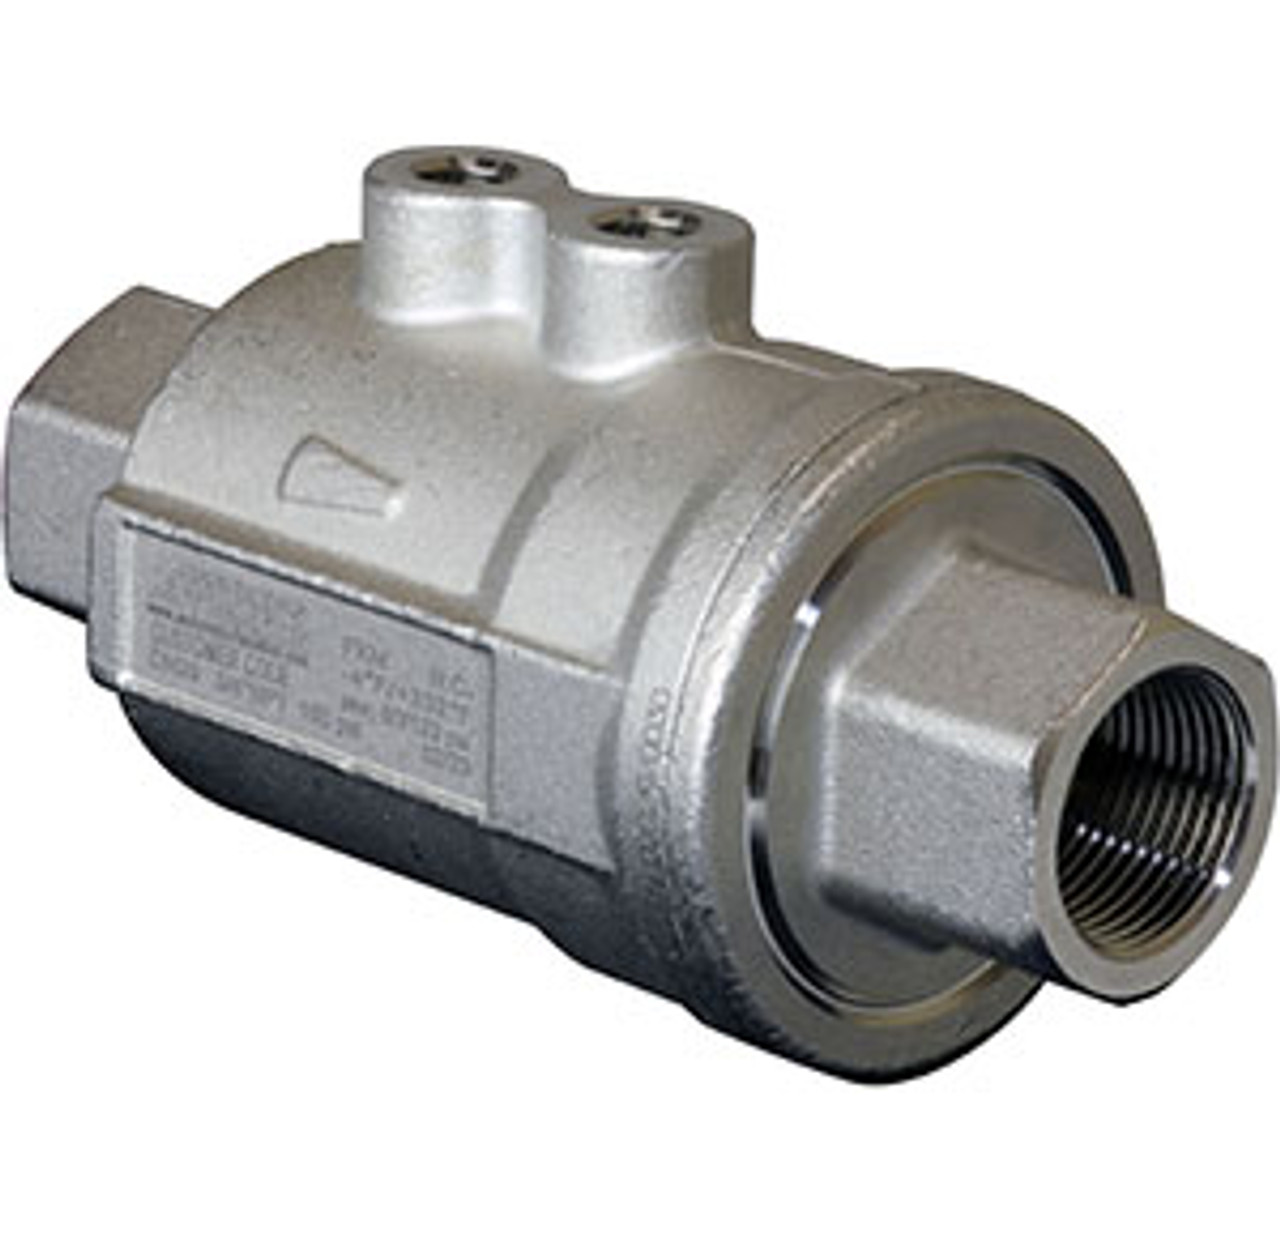 Air-Operated On/Off Coaxial Valve